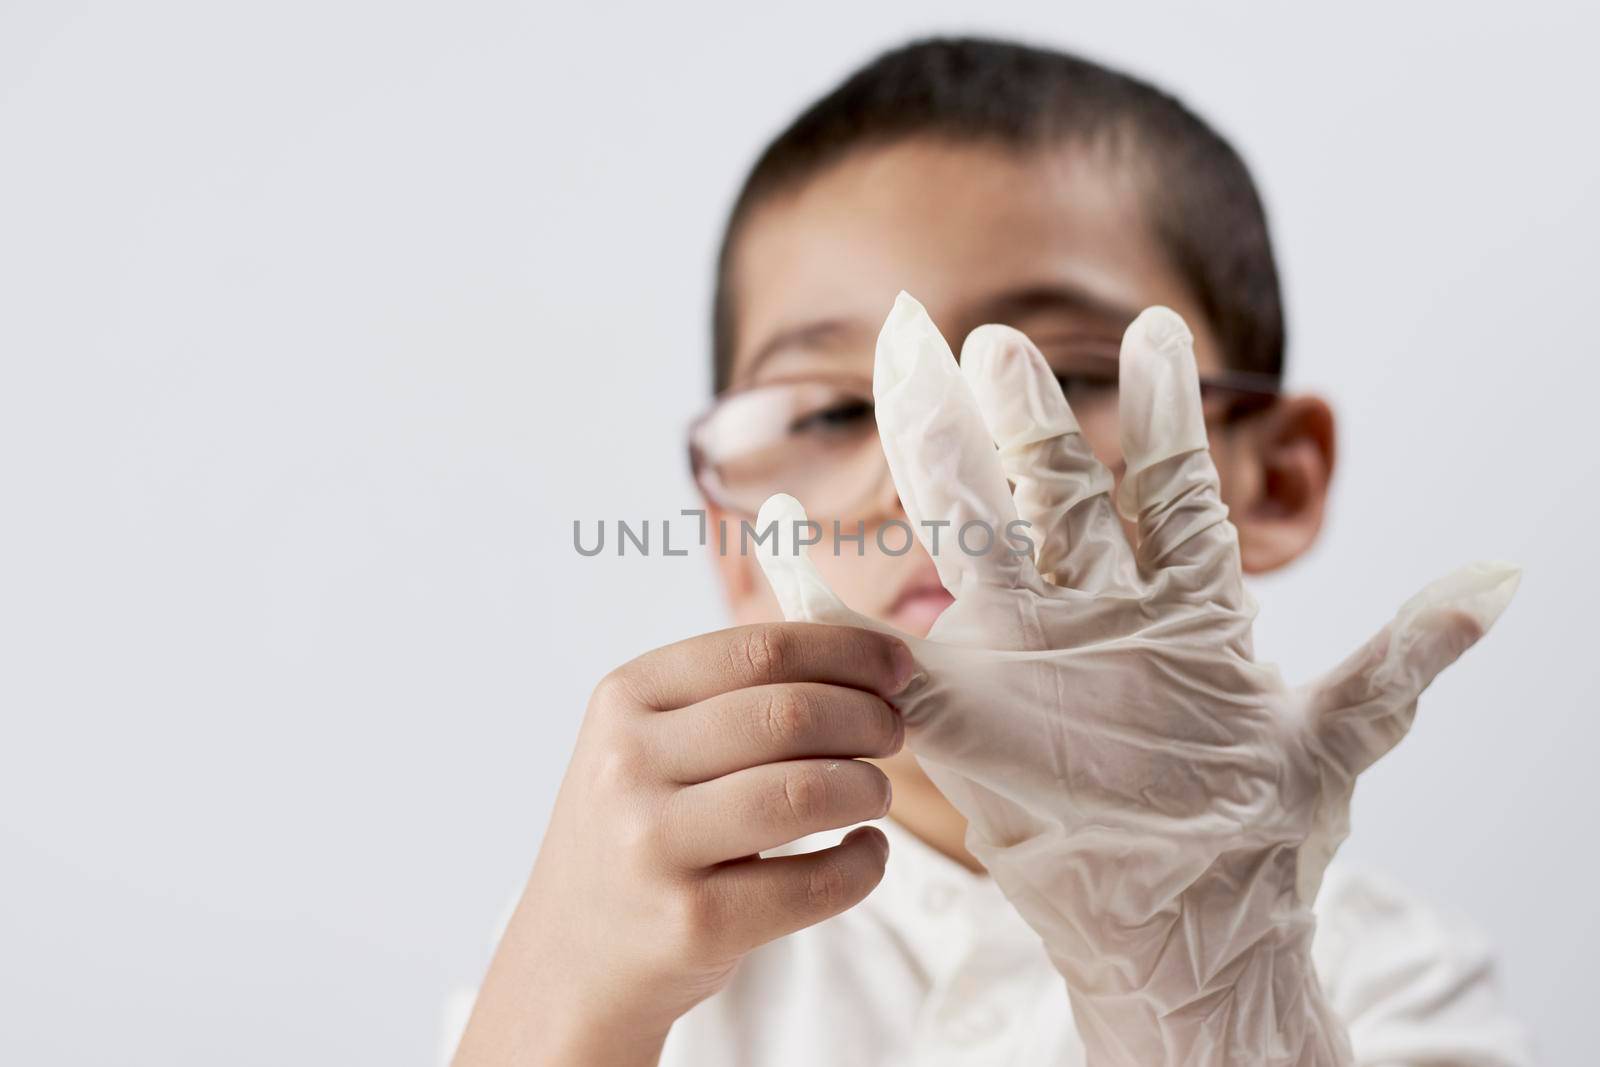 Little scientist wearing protective glove by golibtolibov